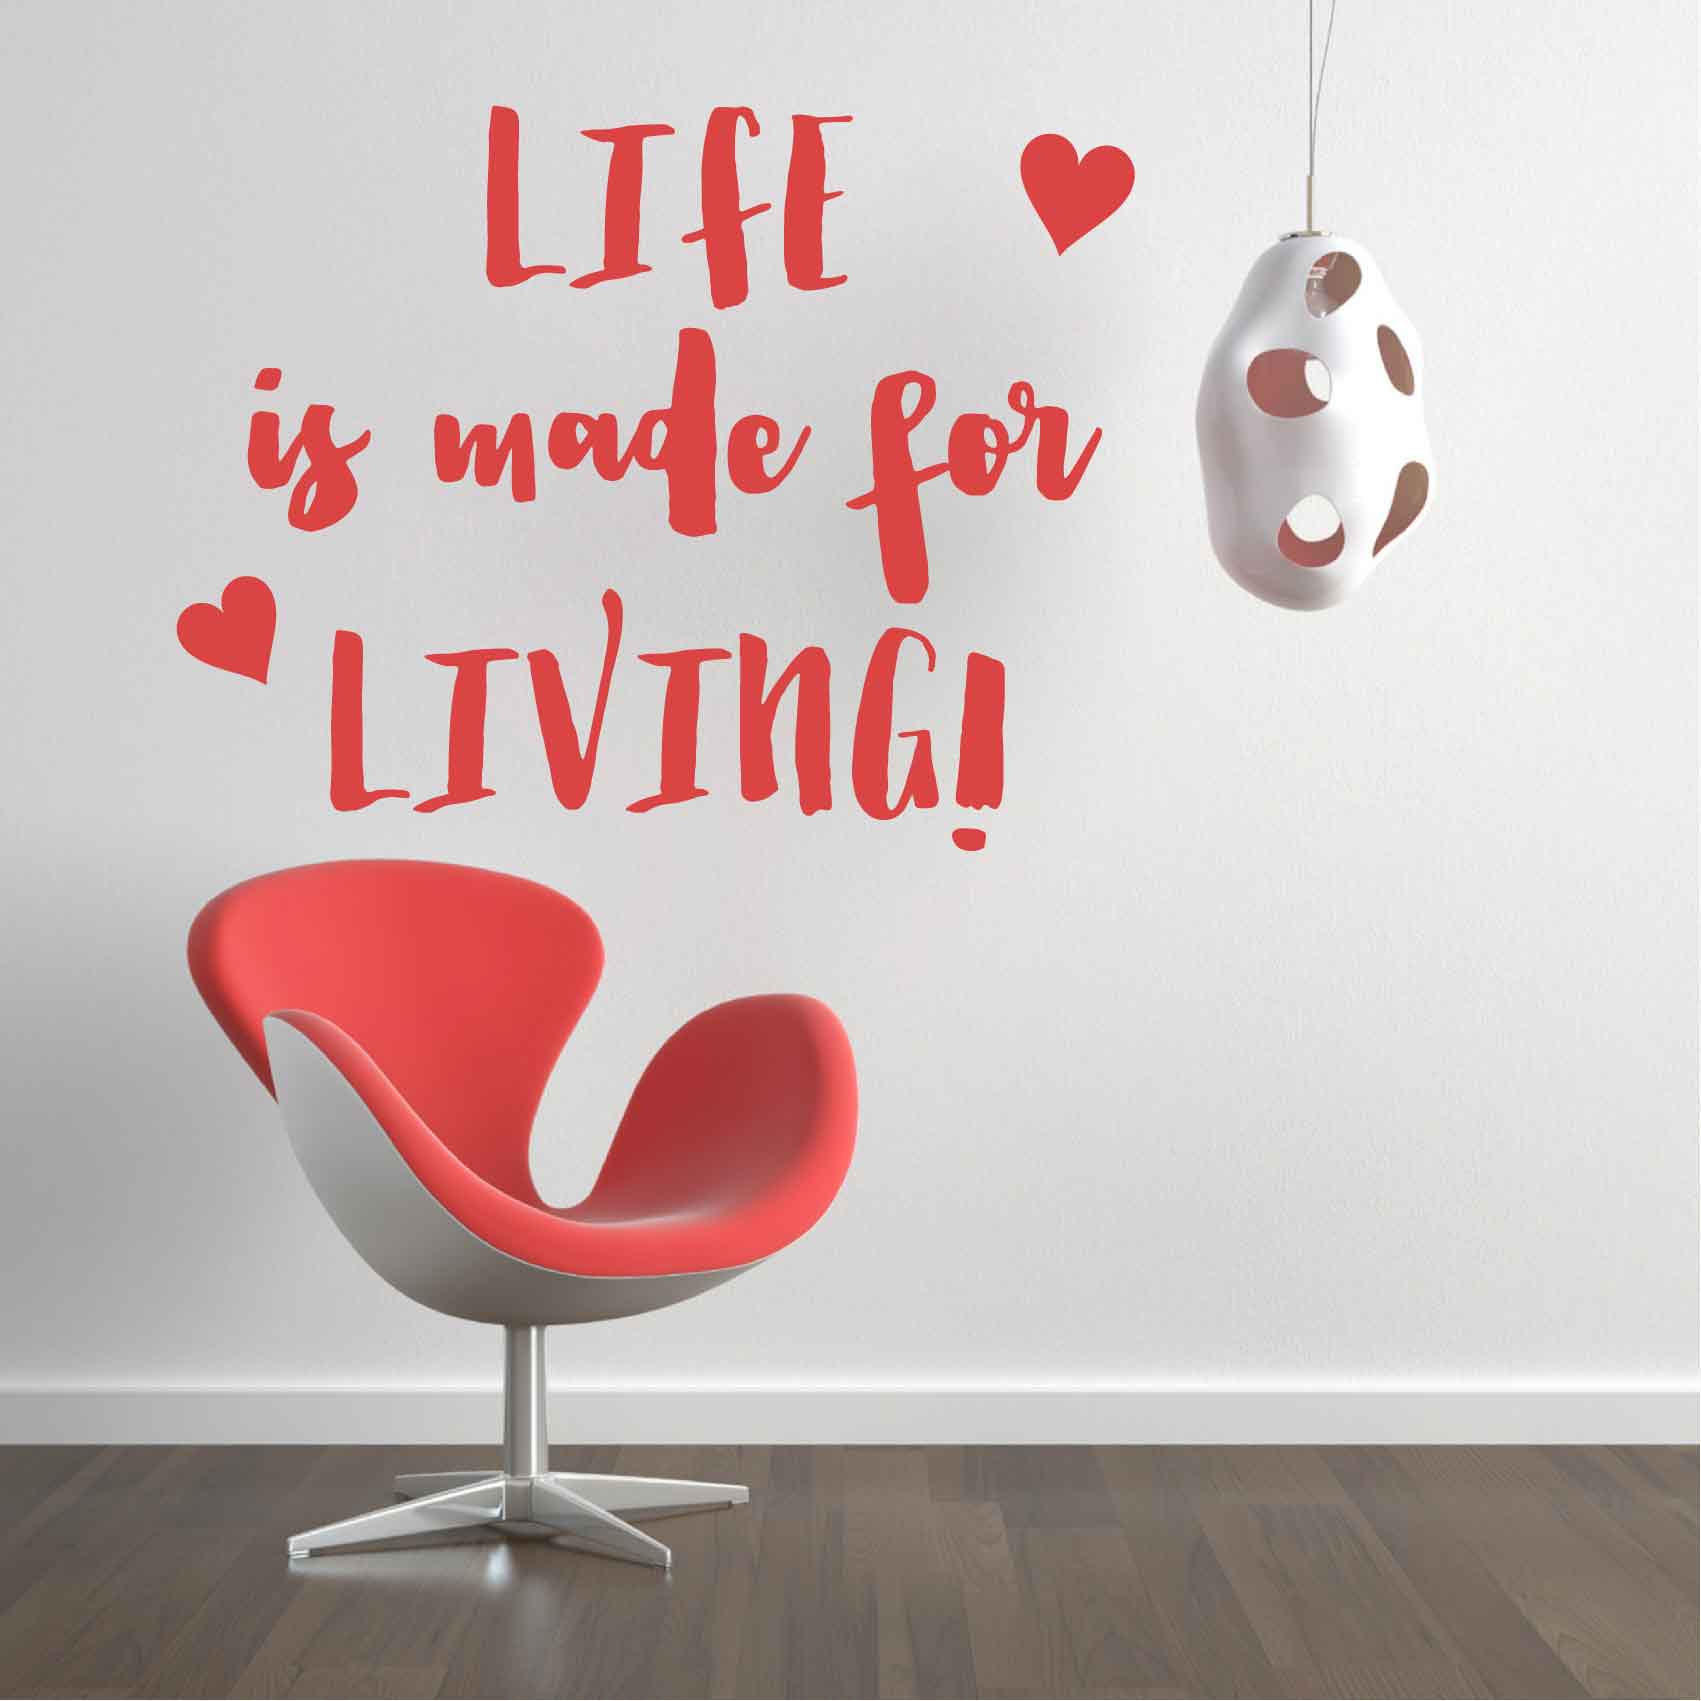 stickers-citation-life-is-made-for-ref31citation-stickers-muraux-citations-sticker-mural-deco-femme-autocollant-salon-chambre-cuisine